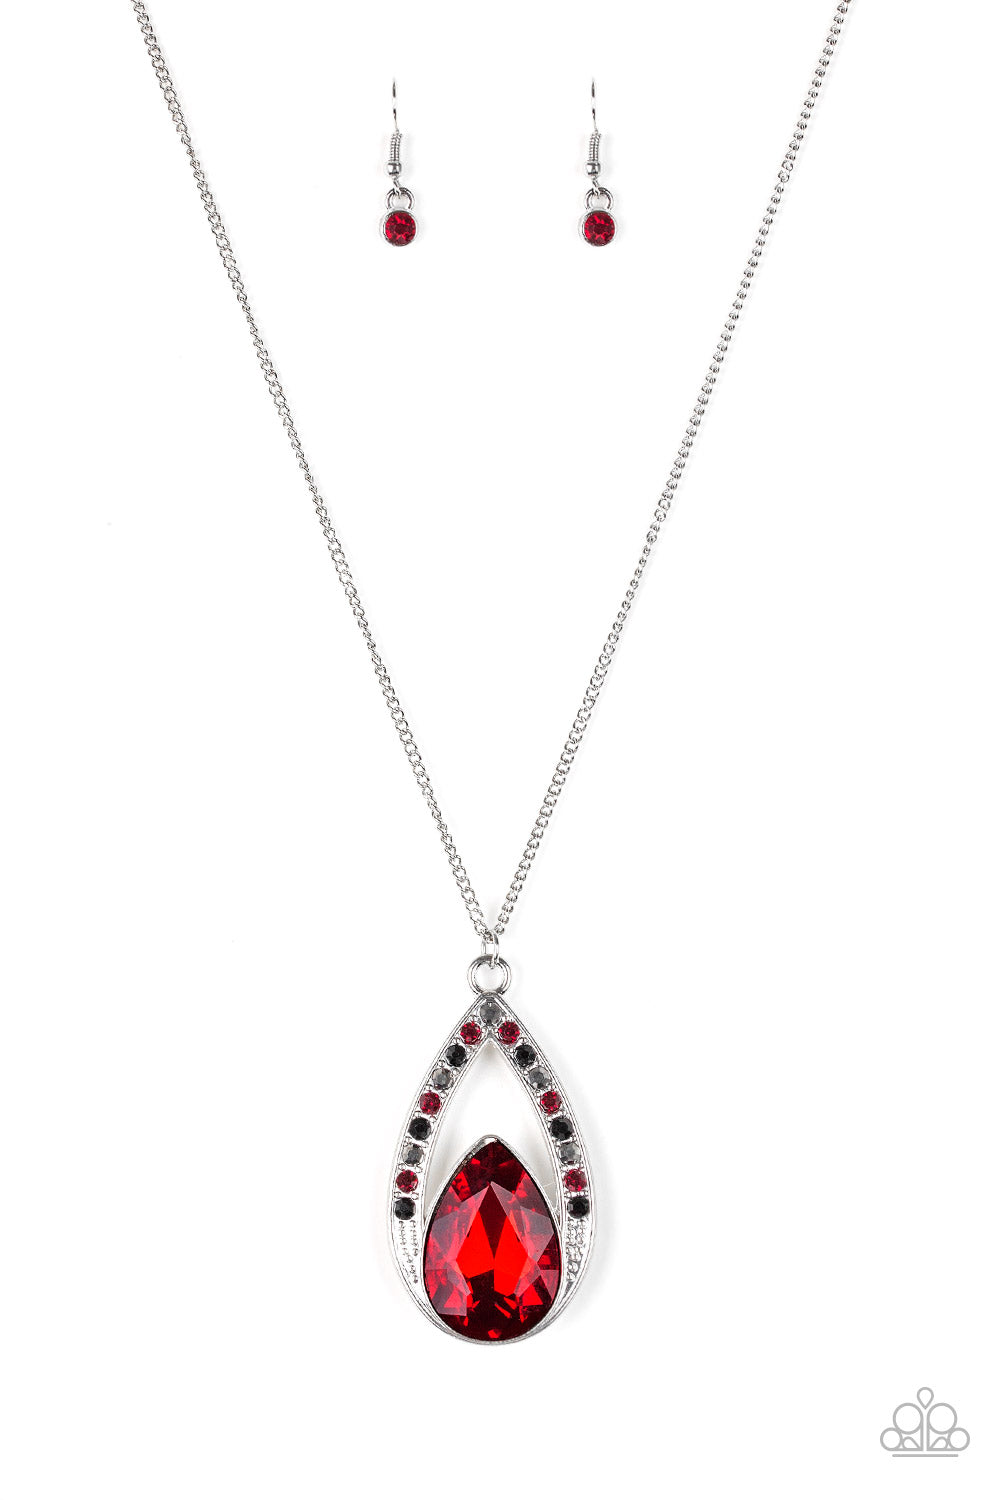 Paparazzi Notorious Noble - Multi Pendant Necklace - A Finishing Touch 